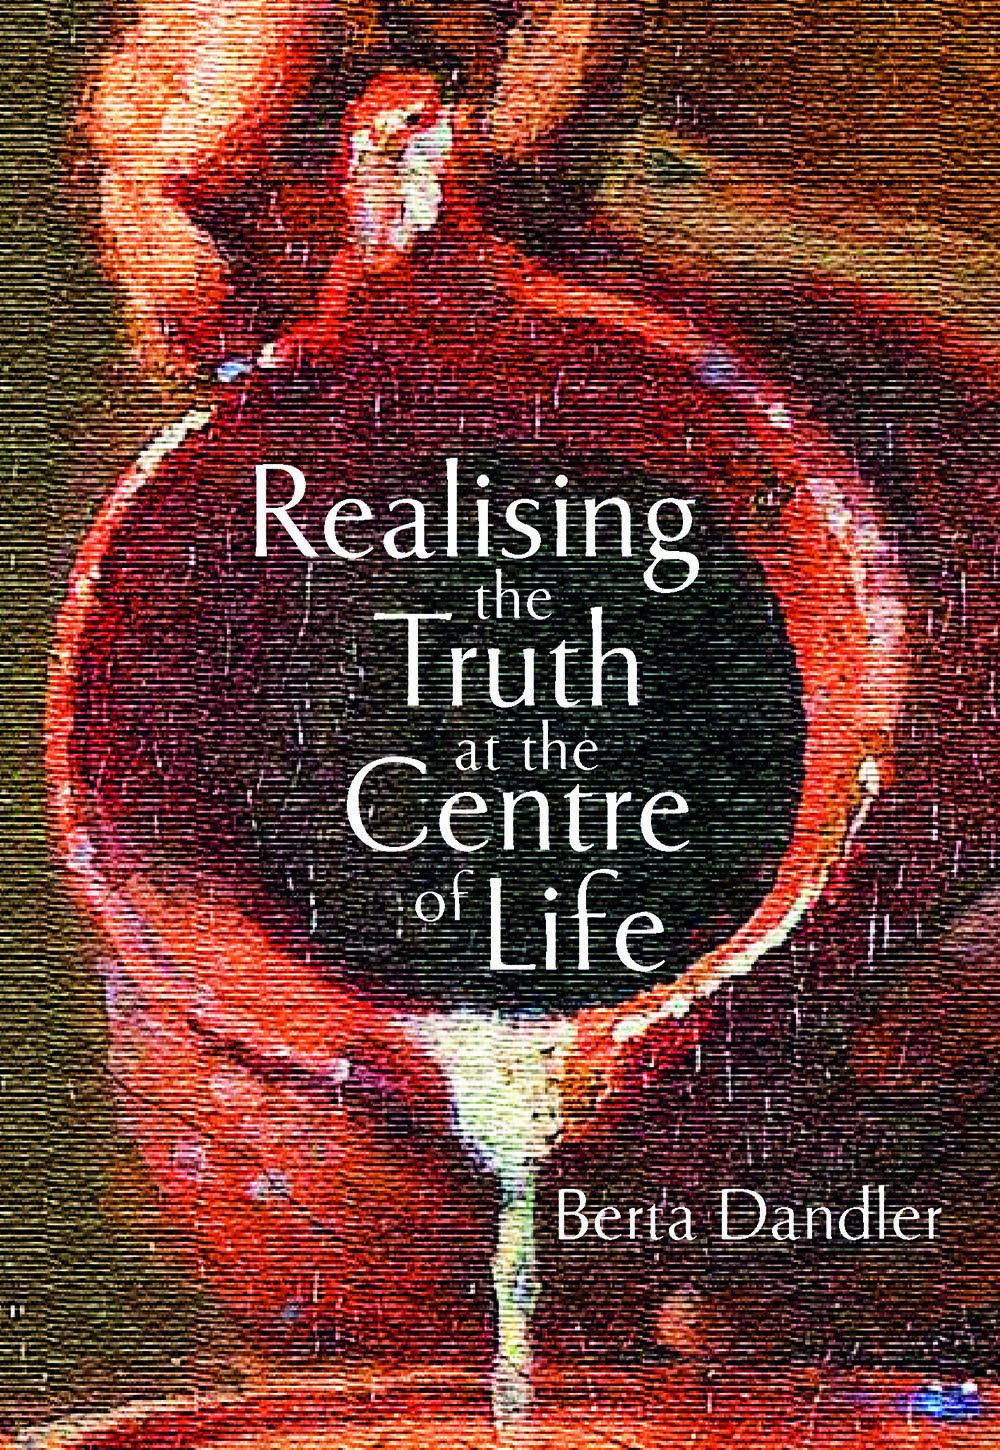 Cover of book Realising the Truth at the Centre of Life